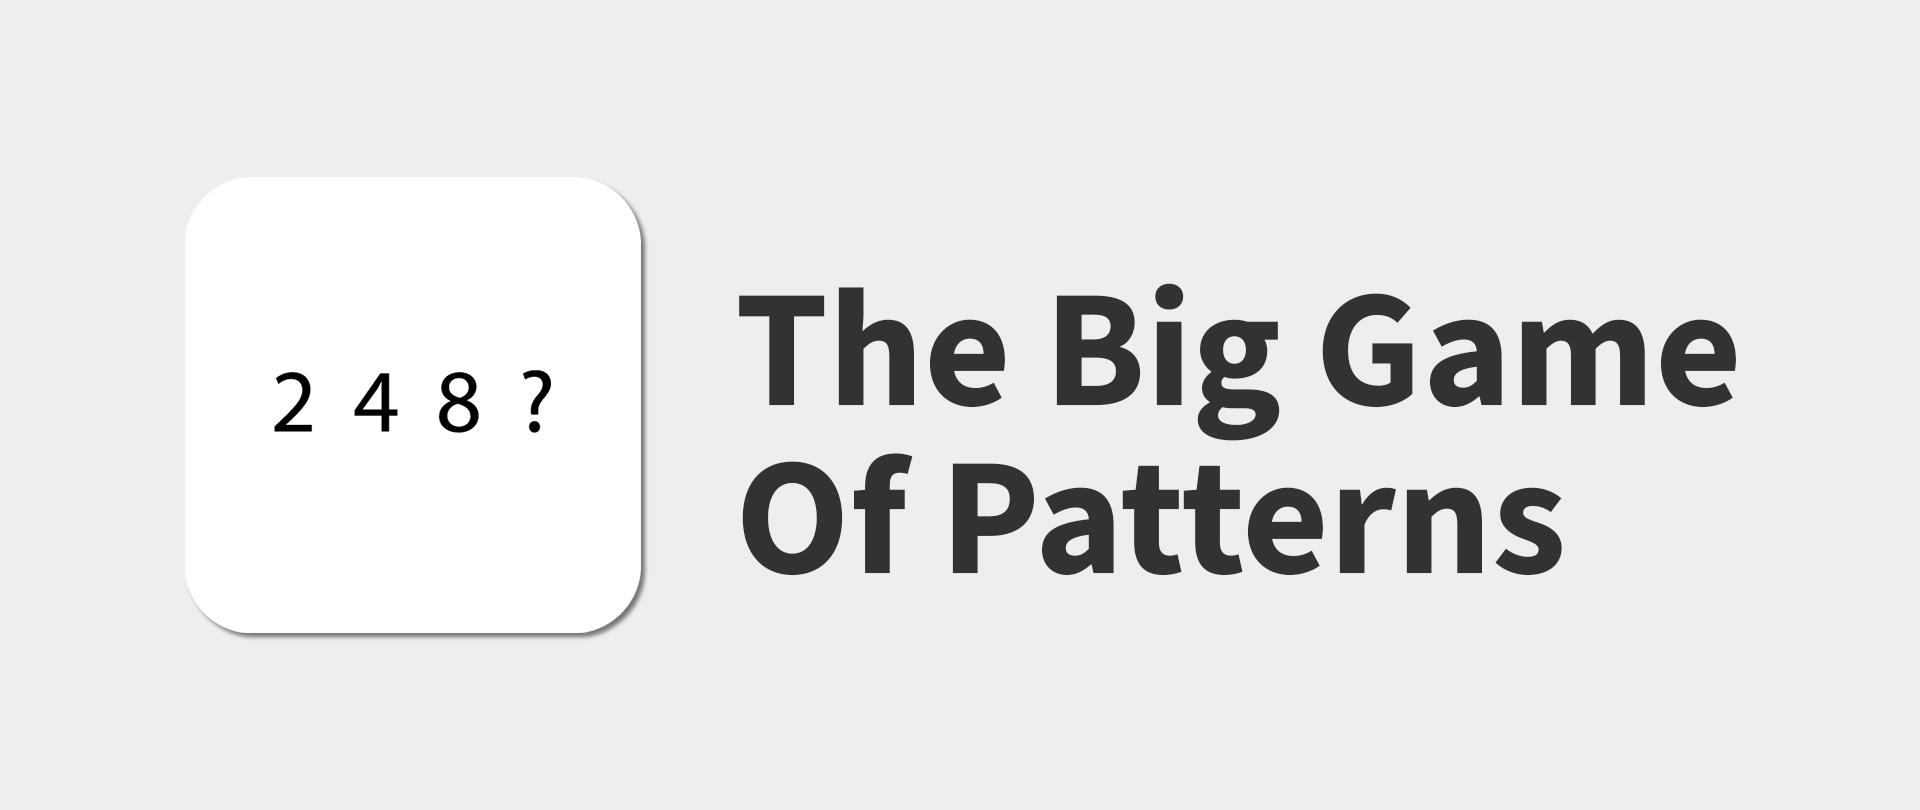 The Big Game Of Patterns